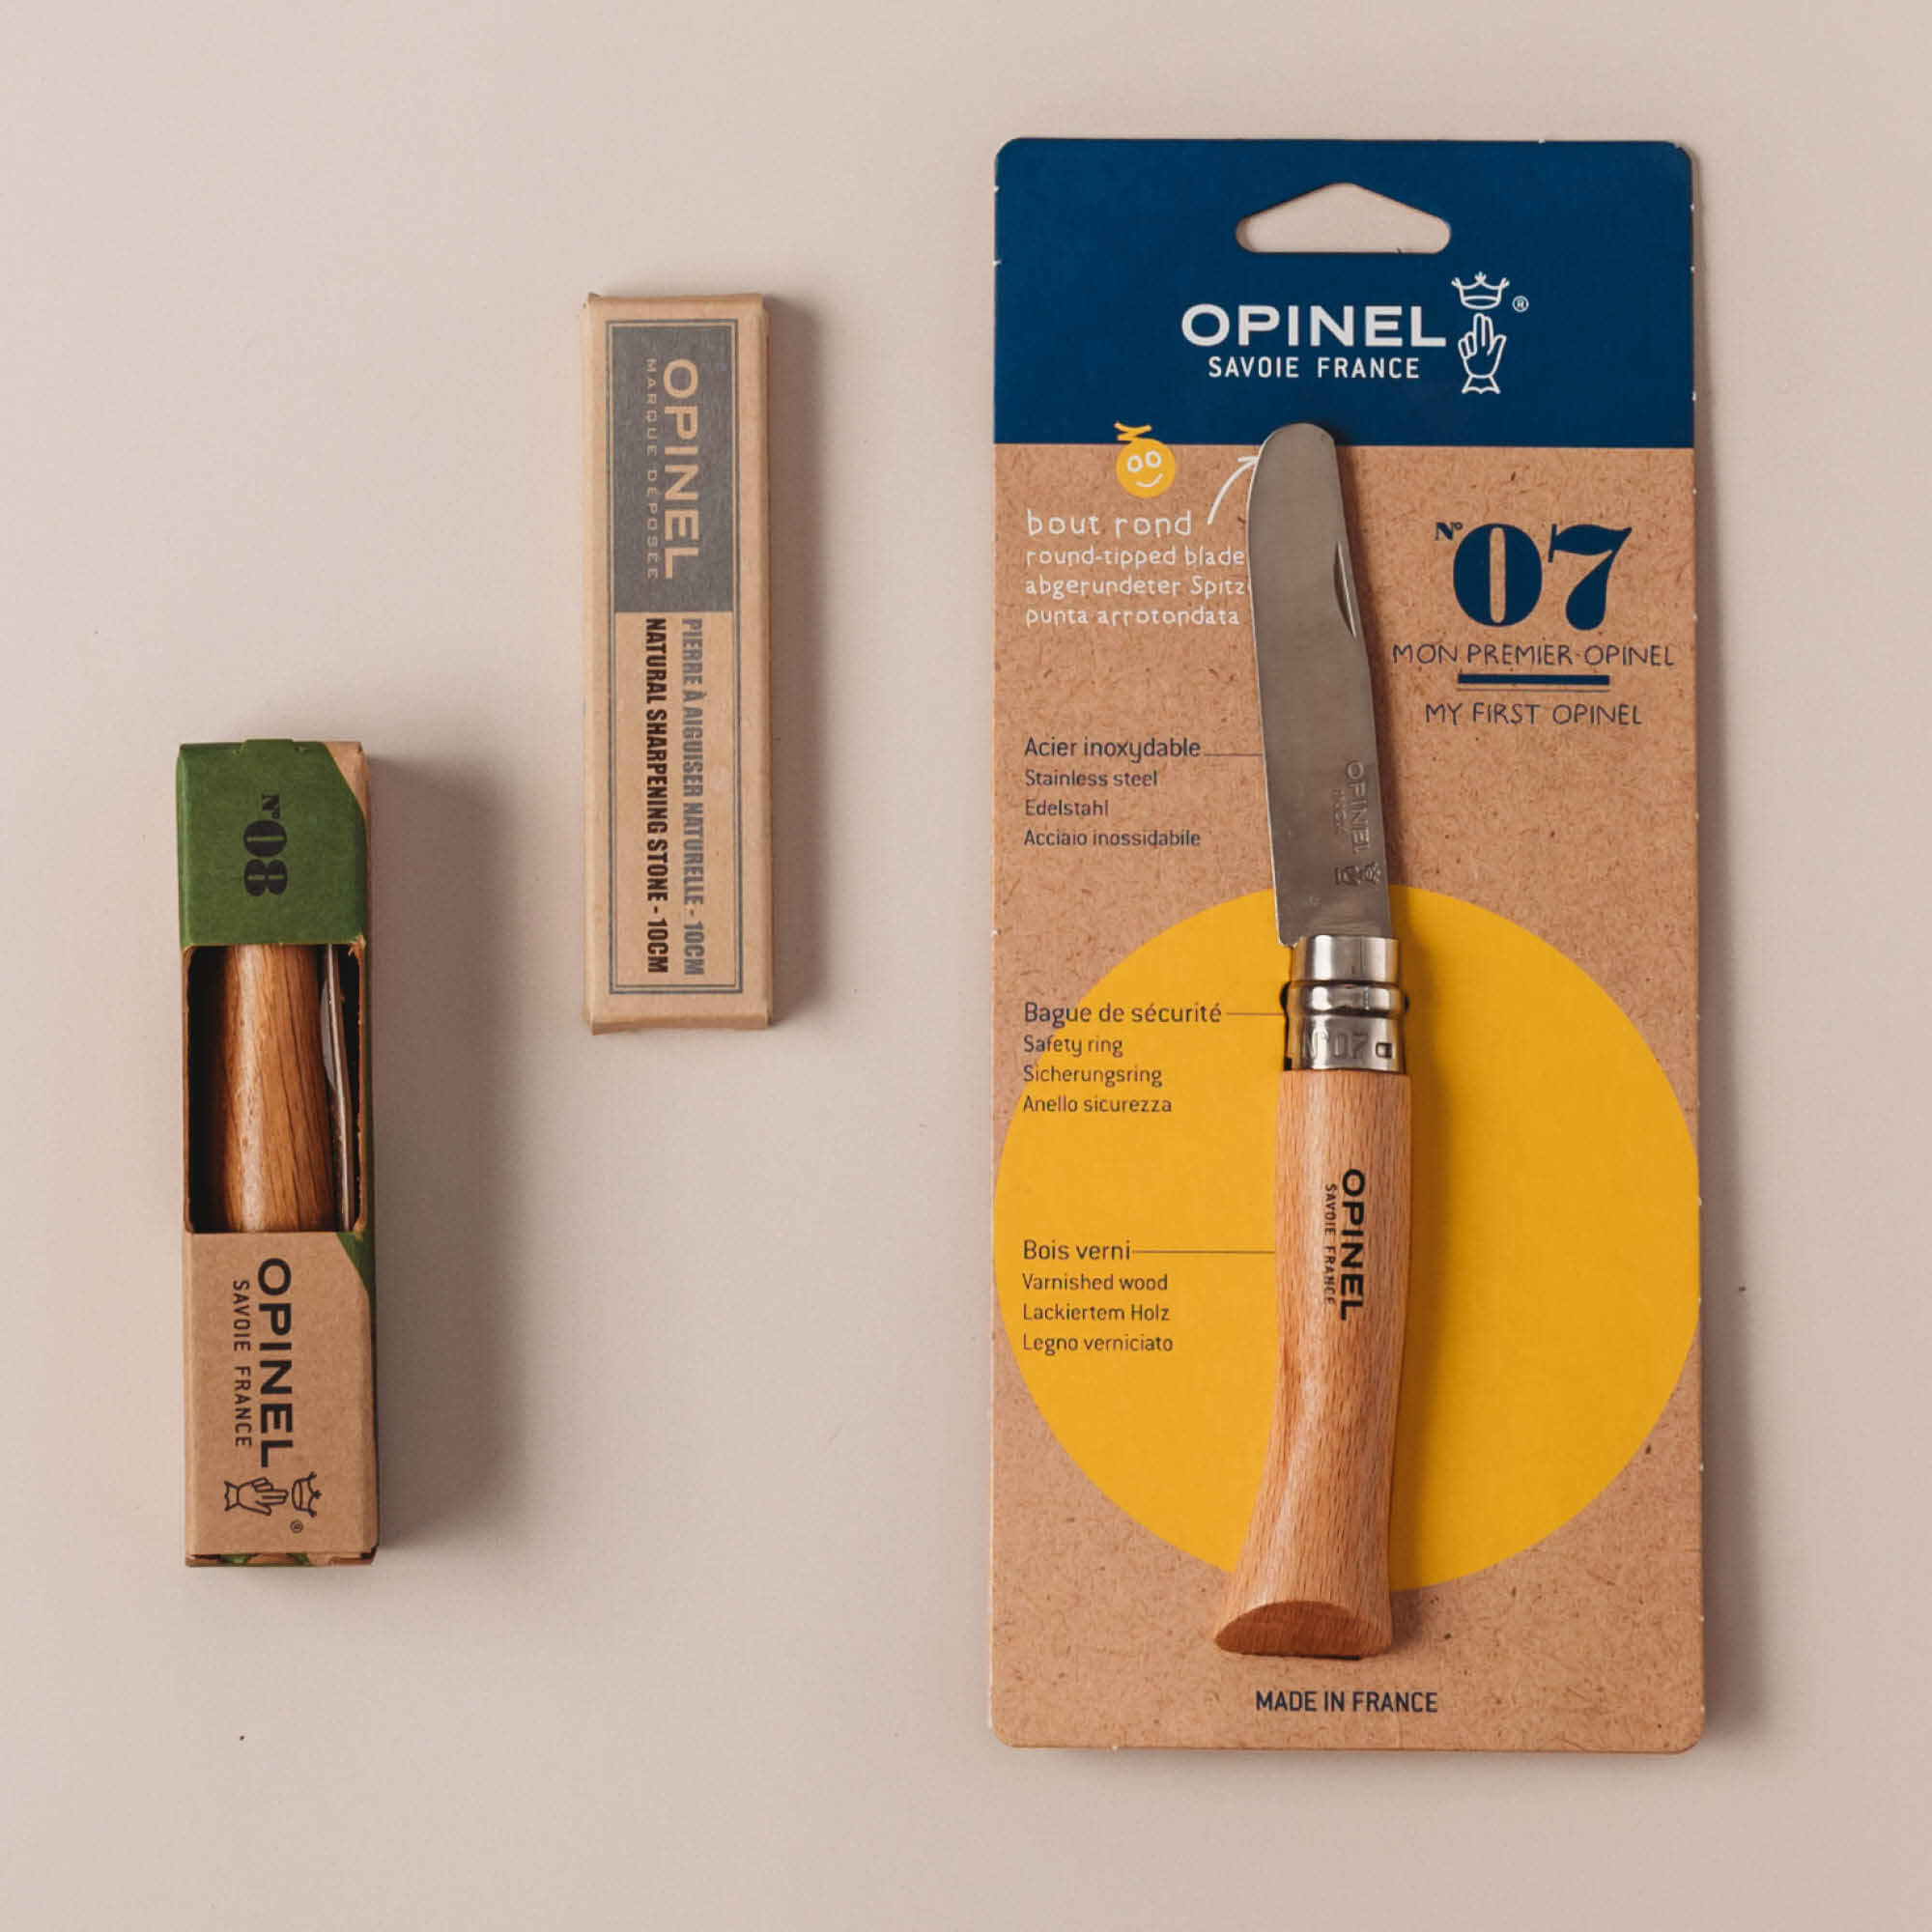 Wood whittling knives for kids for all your nature craft projects, suitable for beginners and advanced woodworkers. Made by Opinel from Your Wild Books.